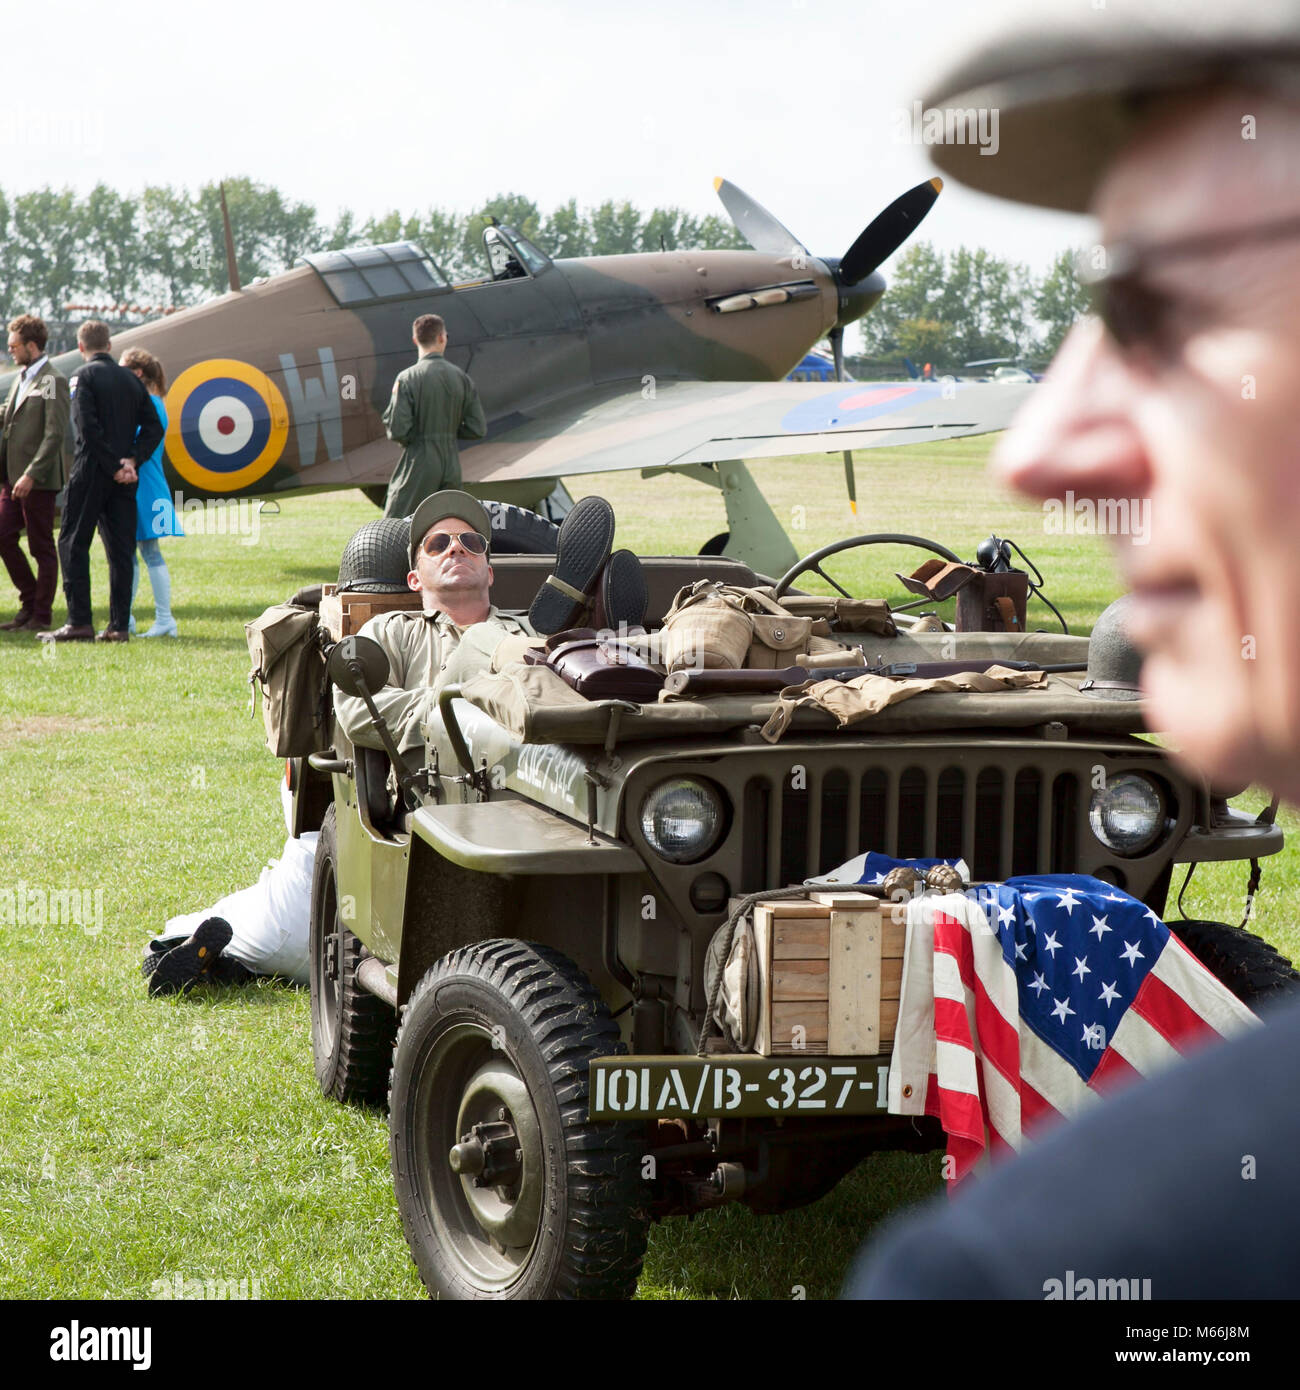 Willis jeep with American flag on airfield with RAF spitfire plane in the background on location at the Goodwood revival event in sussex Stock Photo